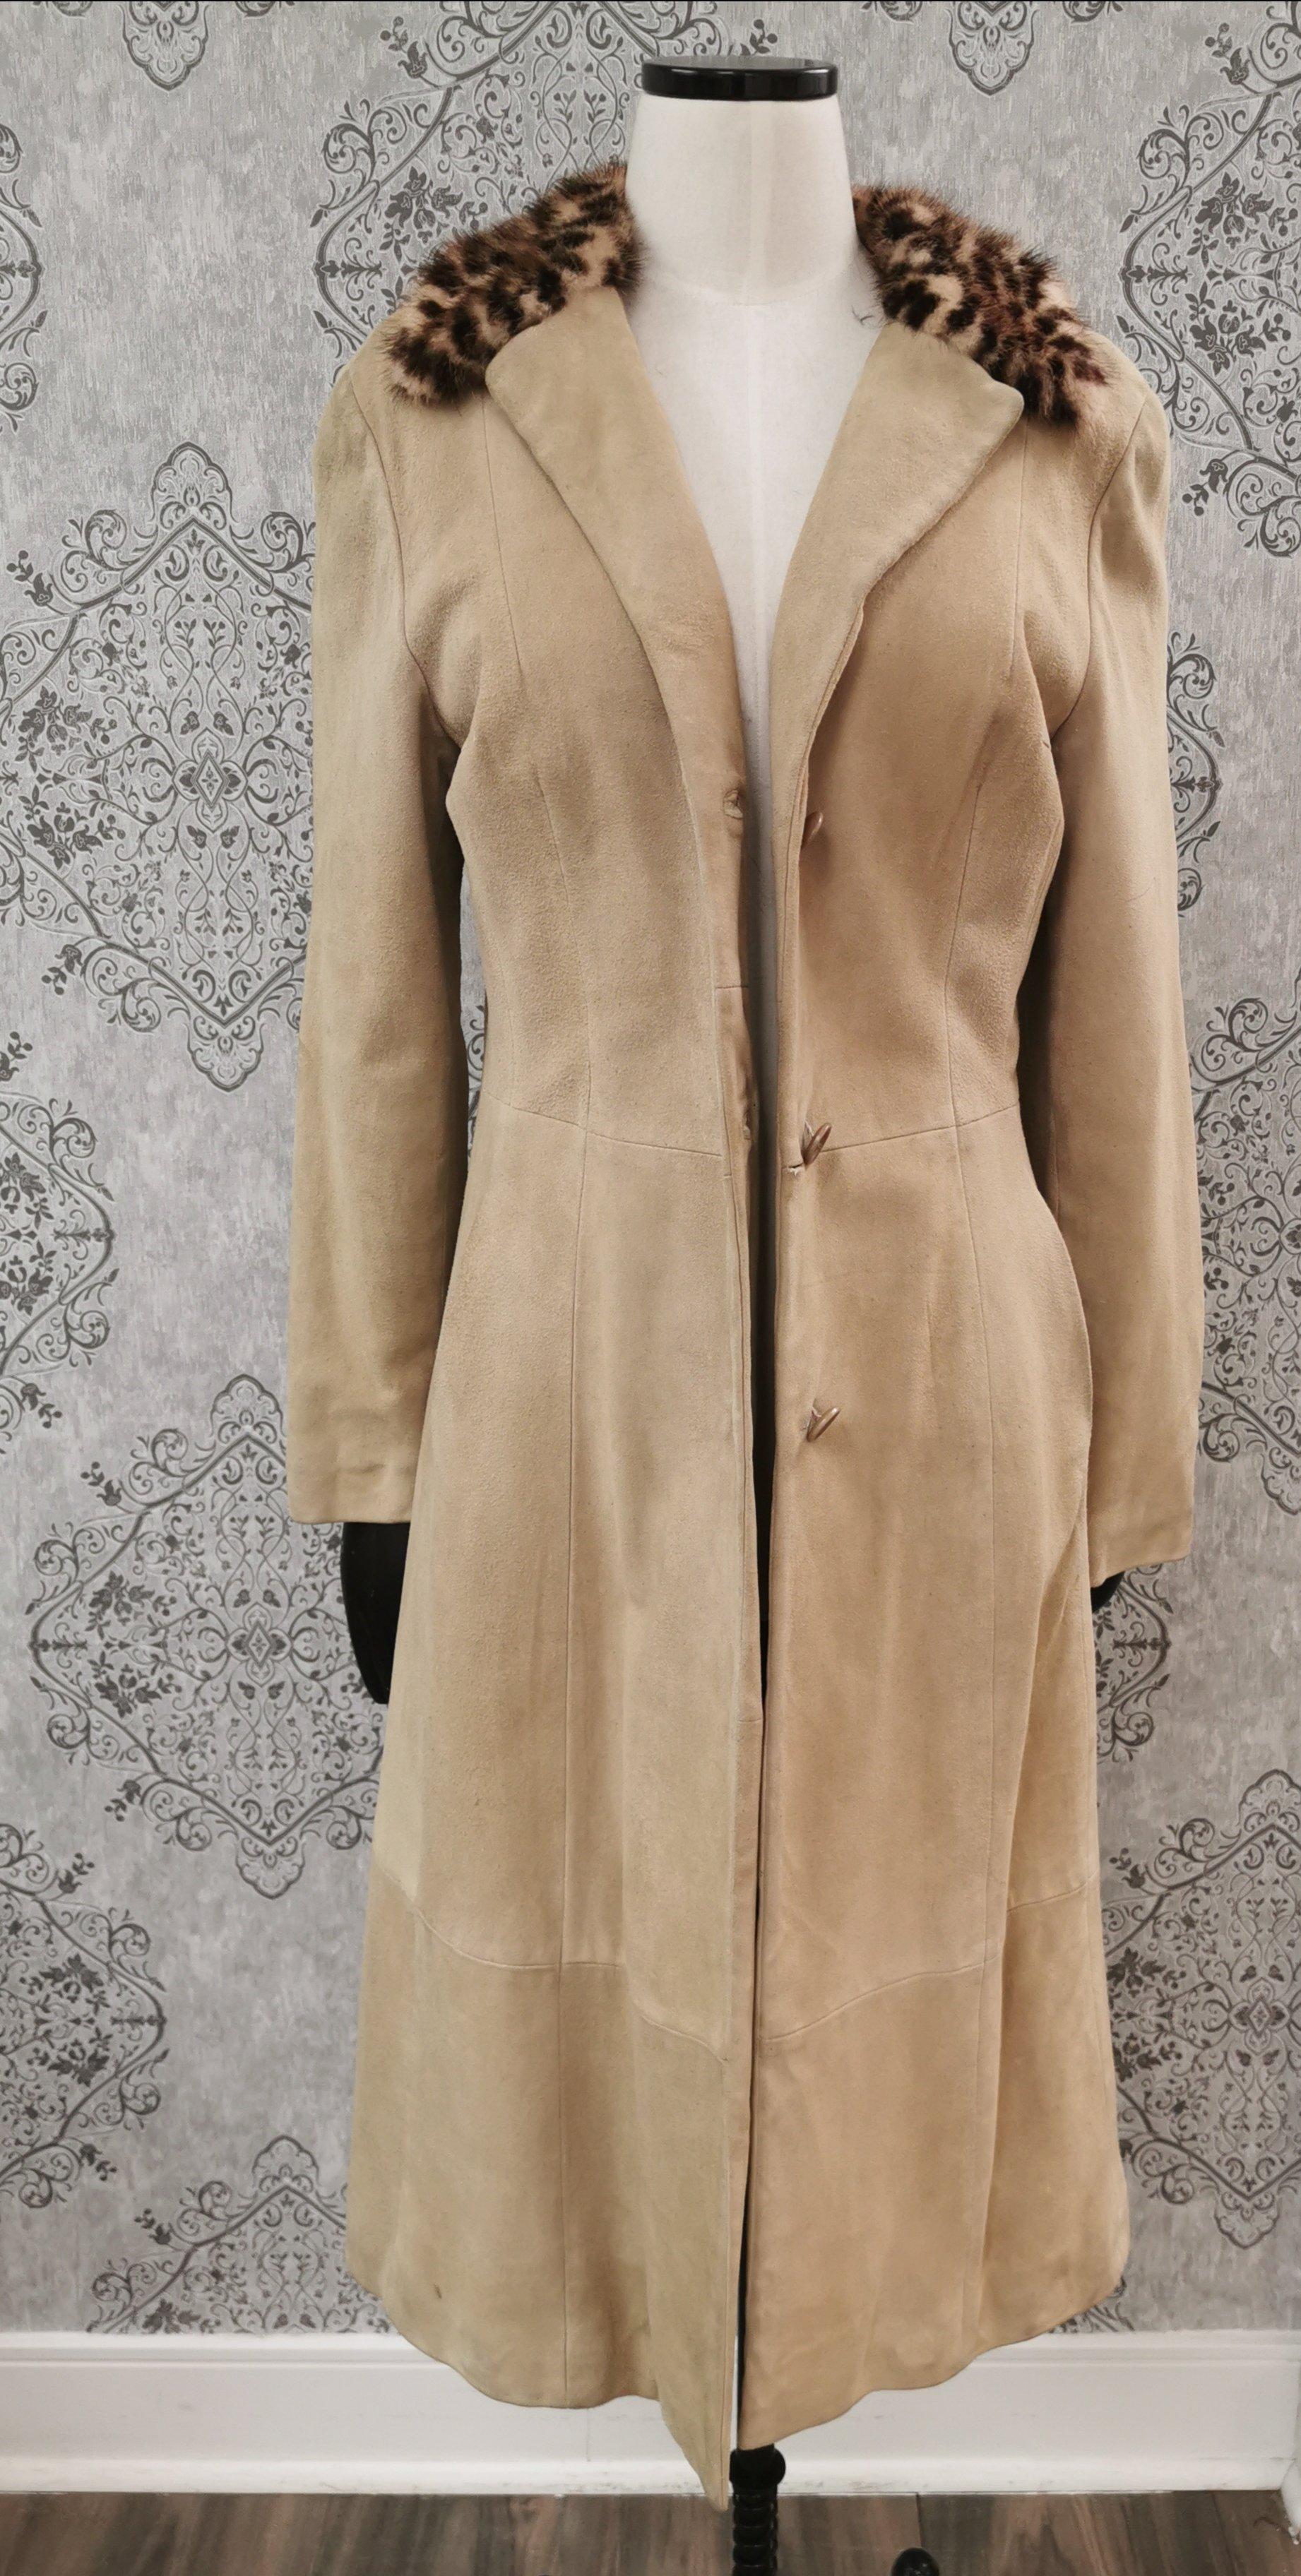 PRODUCT DESCRIPTION:

fashionable perfectly tailored Dolce and Gabbana Lamb suede coat with leopard print mink fur collar trim (Size 4-6/S)

Condition: Pristine
Closure: Buttons Single breasted 
Color: Beige and leopard print
Material: Lamb suede